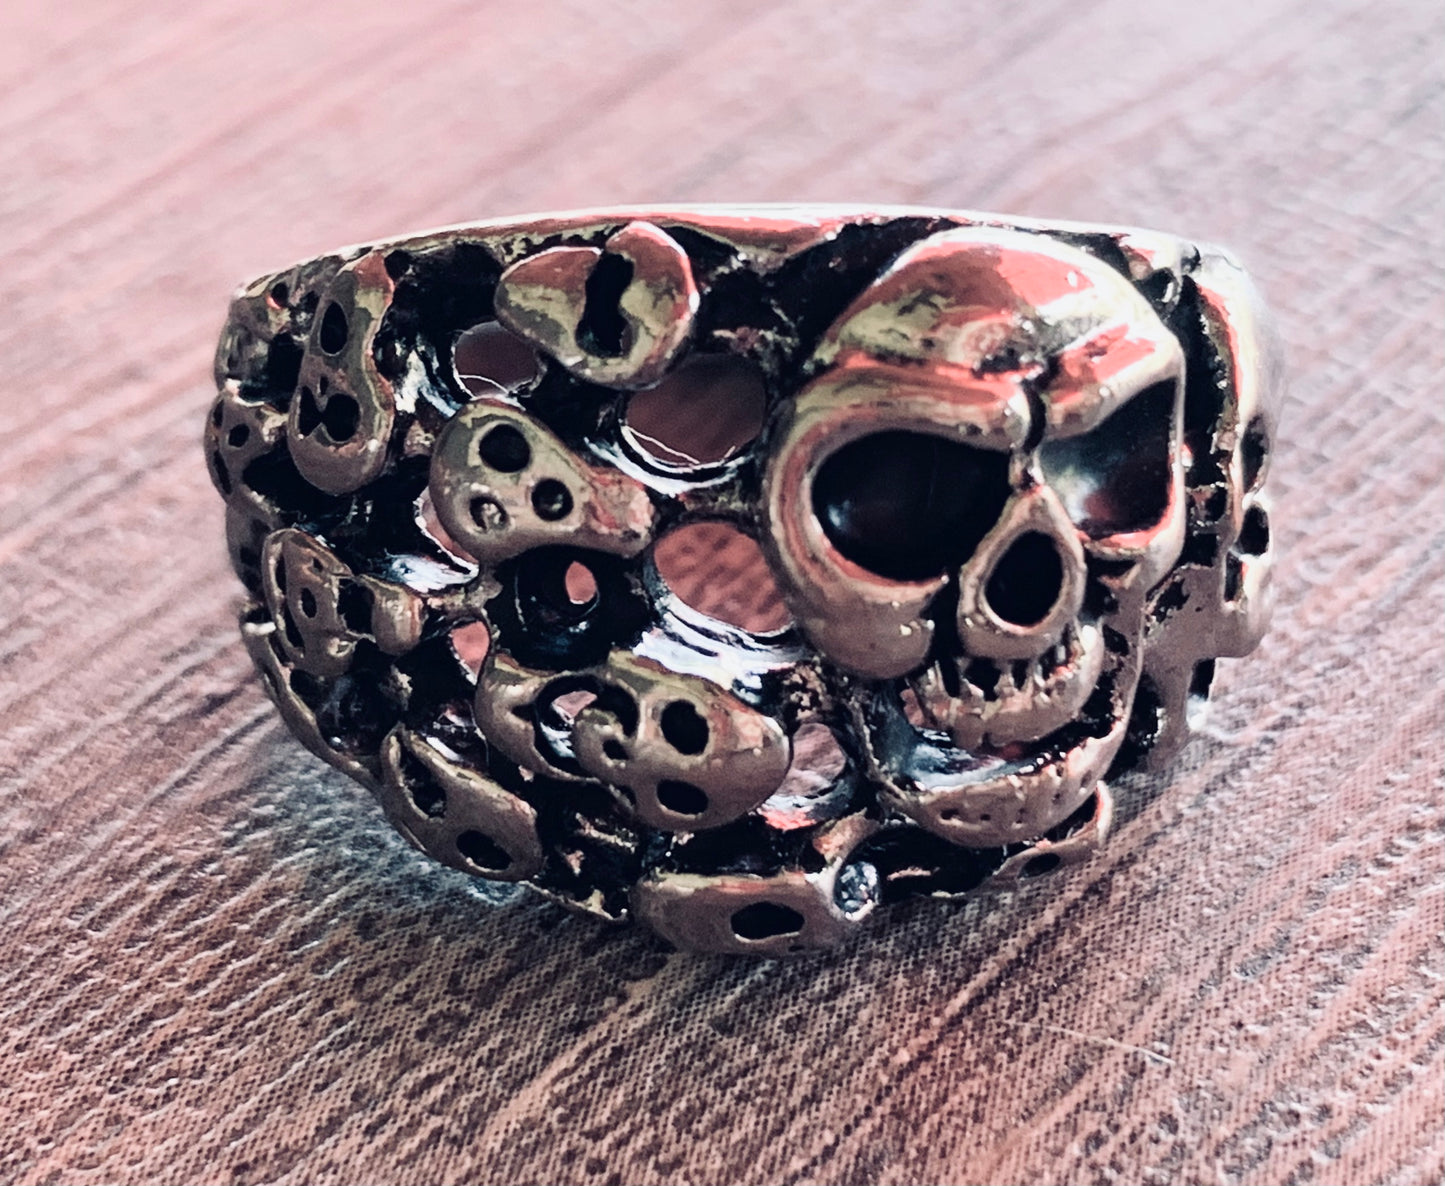 Vintage Skull Ring Size 9.5 (Pre-Owned)